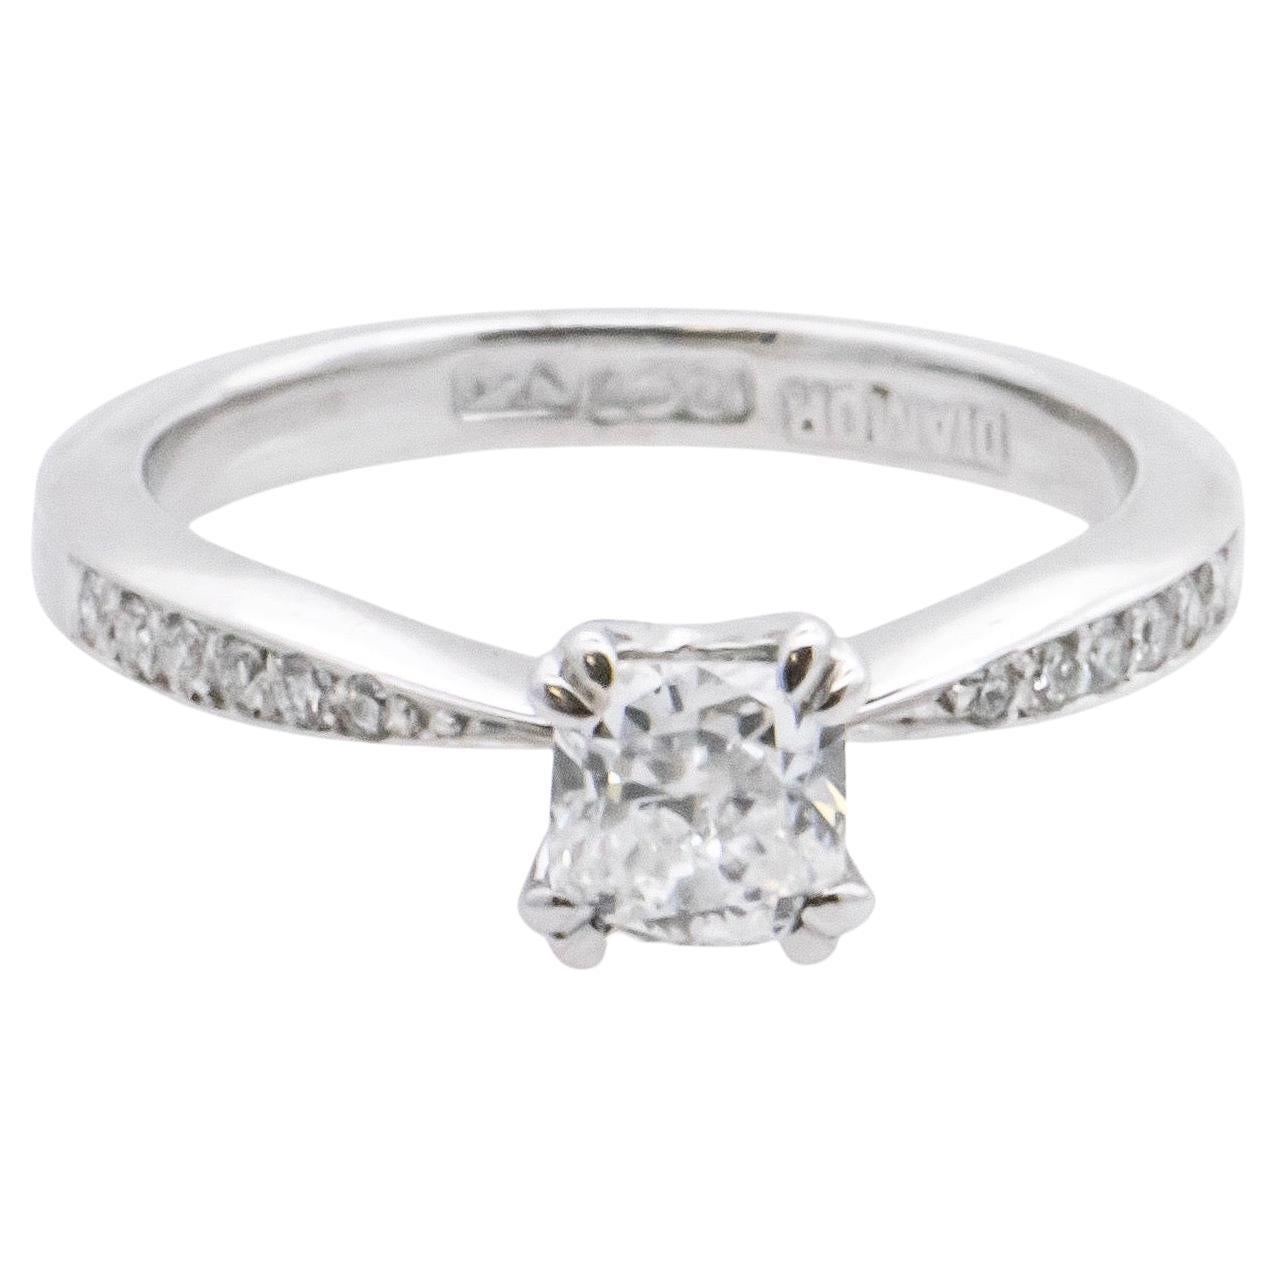 White Gold Engagement Ring Claw Set with One Cushion Cut Diamond 0.72 Carats